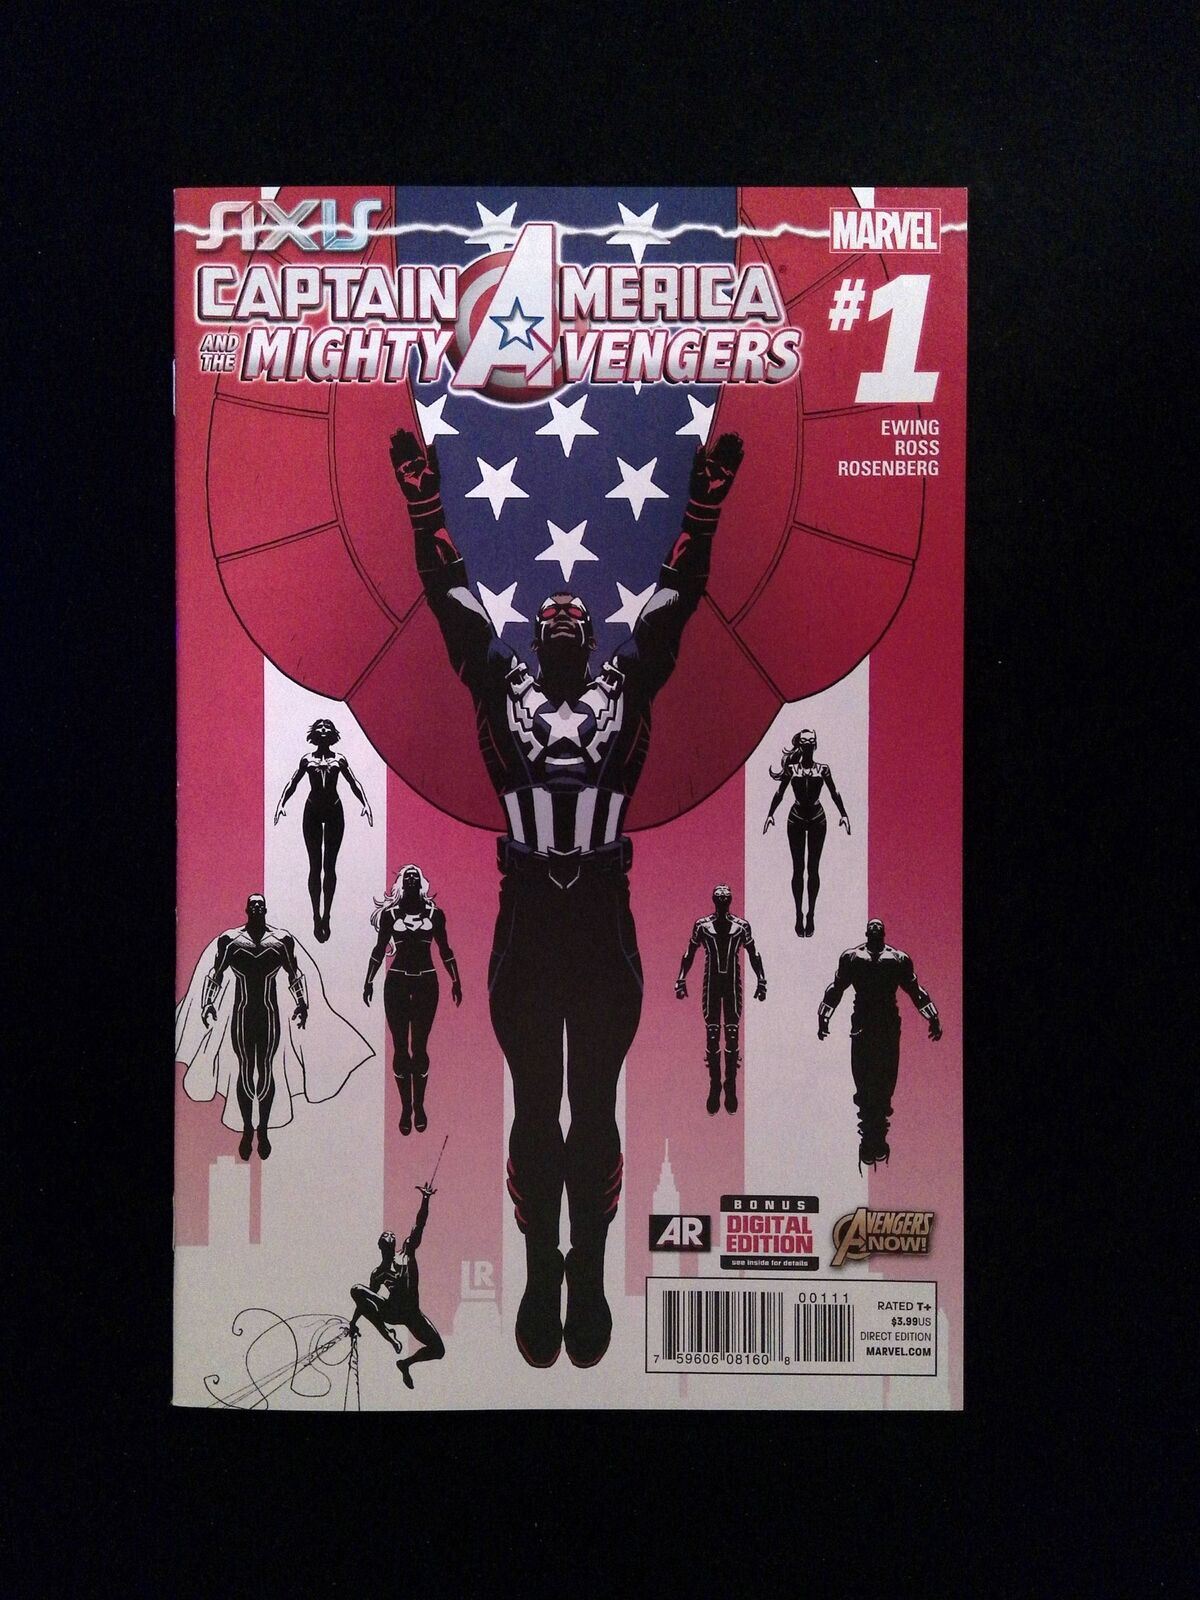 Captain America  and the  Mighty Avengers #1  MARVEL Comics 2015 VF/NM